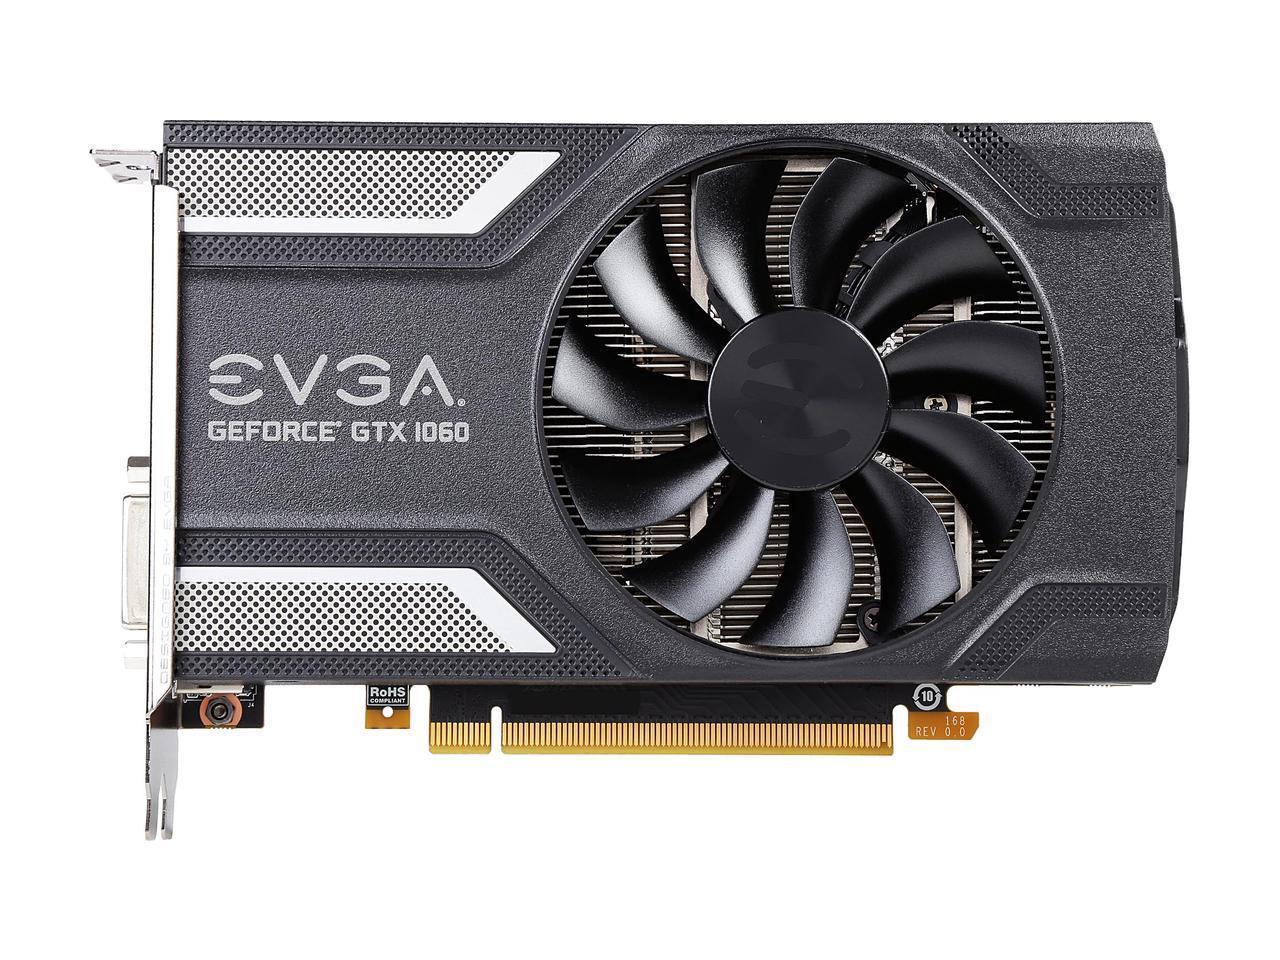 EVGA GeForce GTX 1060 SC GAMING, ACX 2.0 (Single Fan) 6GB, 06G-P4-6163-KR, GDDR5, DX12 OSD Support (PXOC), 6.8 Inches Vide